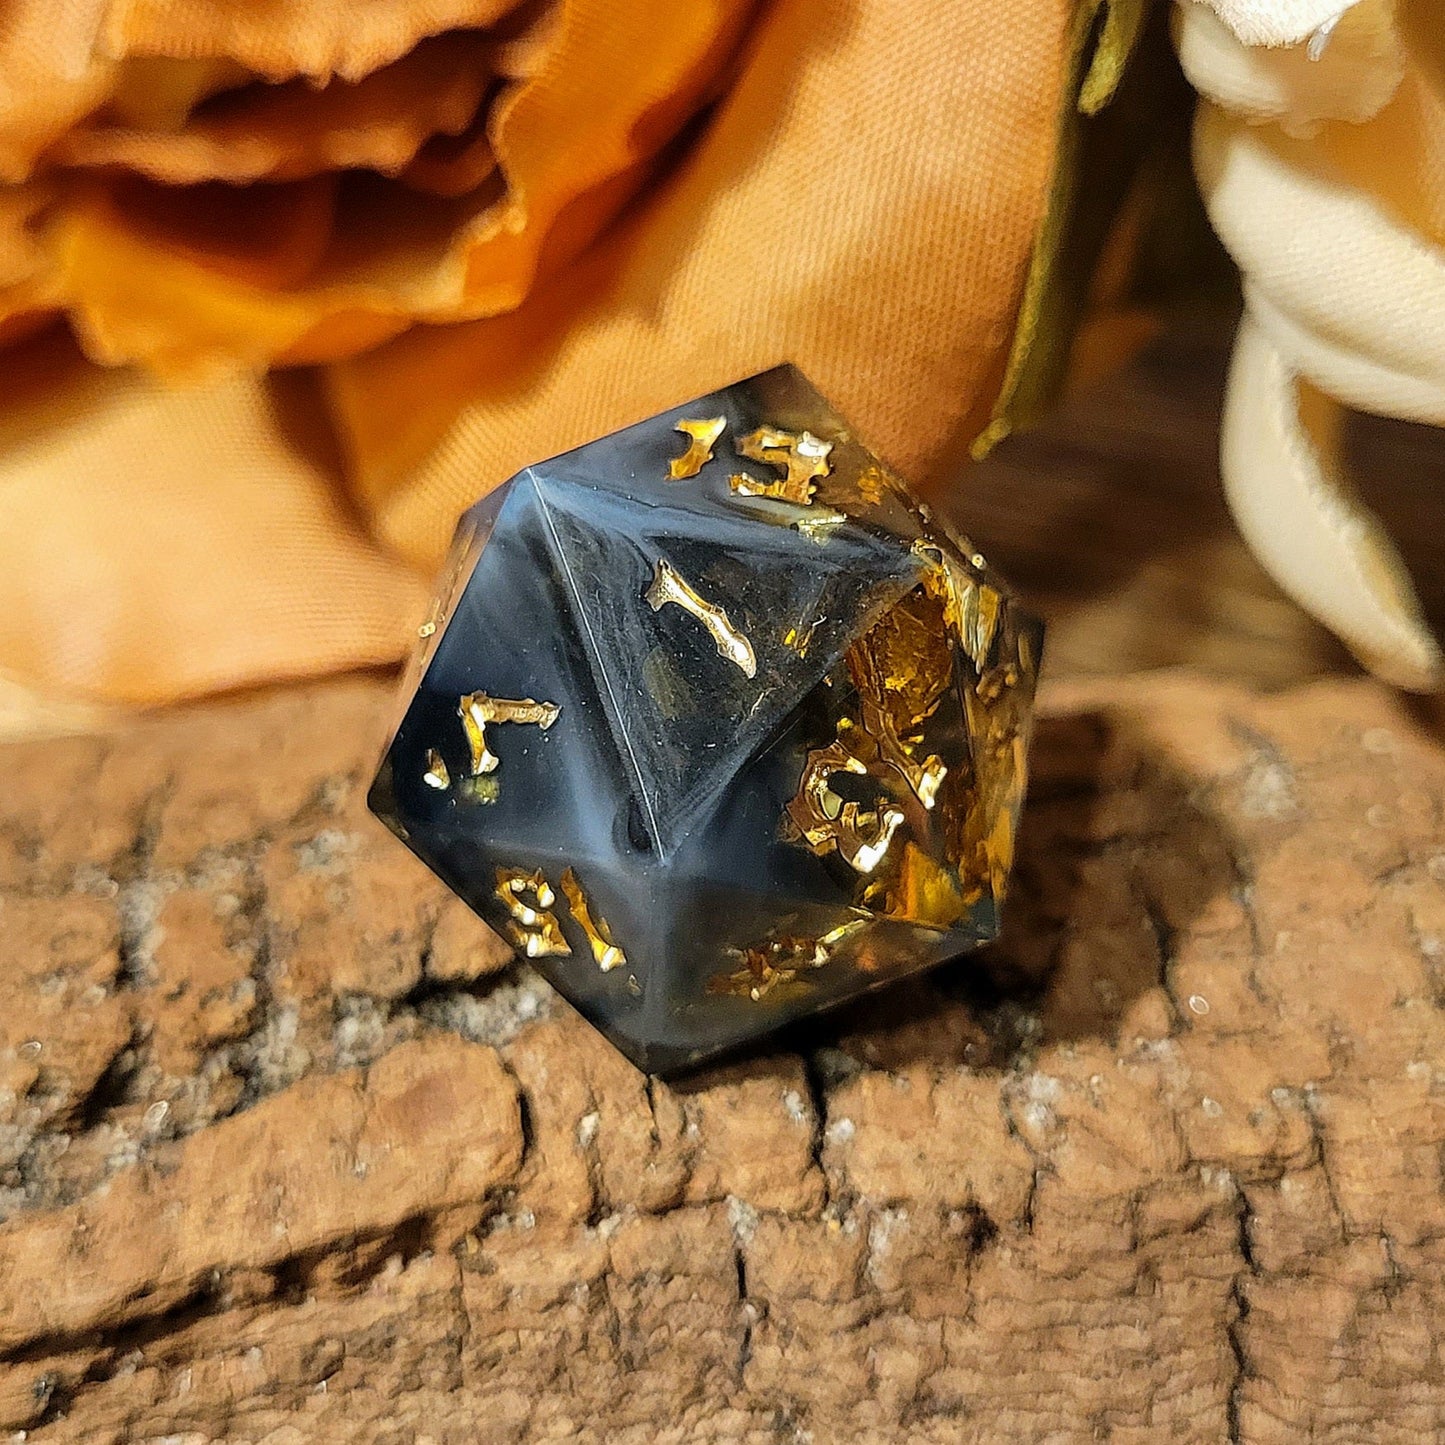 A twenty-sided die that has a clear base with black, white, and Oxford blue drips. The font is Sugar Bee RPG's signature death metal font, and is inked in gold. The most prominent numbers are 19, 1, 7, 15, and 13. Large gold foil flakes are suspended within the die. This angle looks inky and dark with splashes of milky blue.